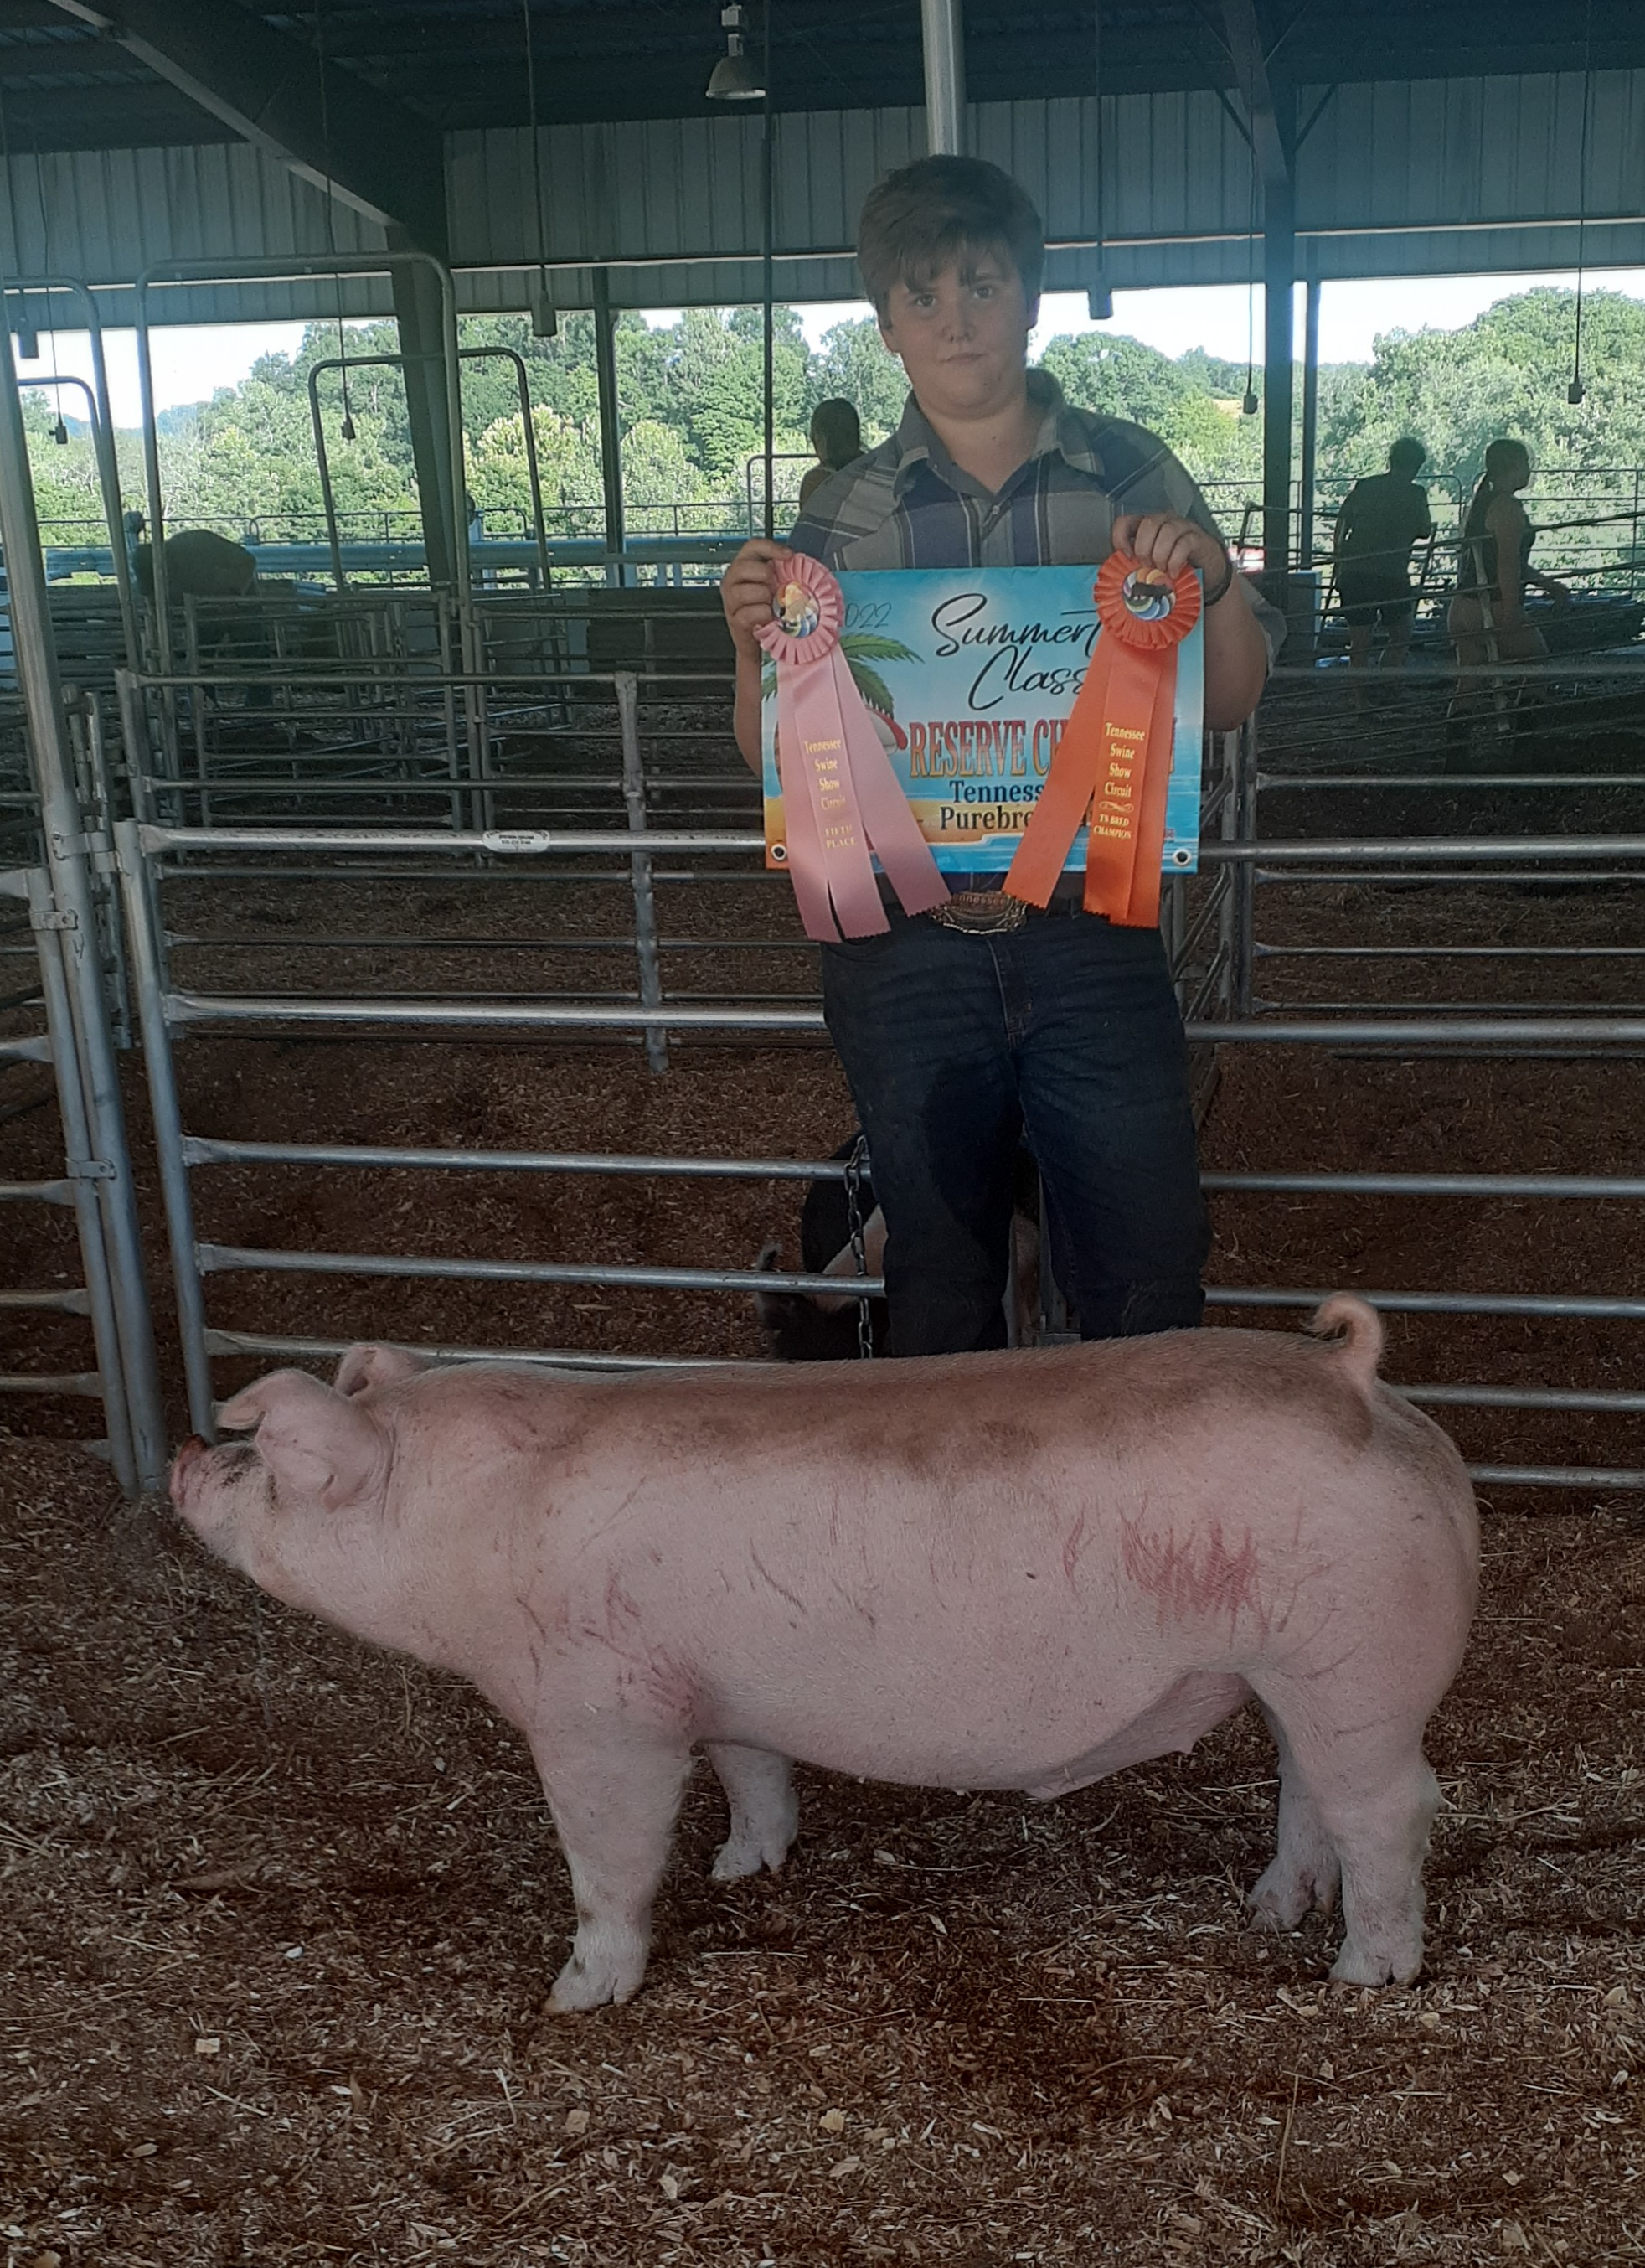 Tylan Lusk
2022 Summertime Classic
Champion Chester White Barrow 
Open Show
Champion Chester White Barrow 
TN Bred Show
5th Overall Open Purebred Barrow 
Reserve Champion TN Bred 
Purebred Barrow